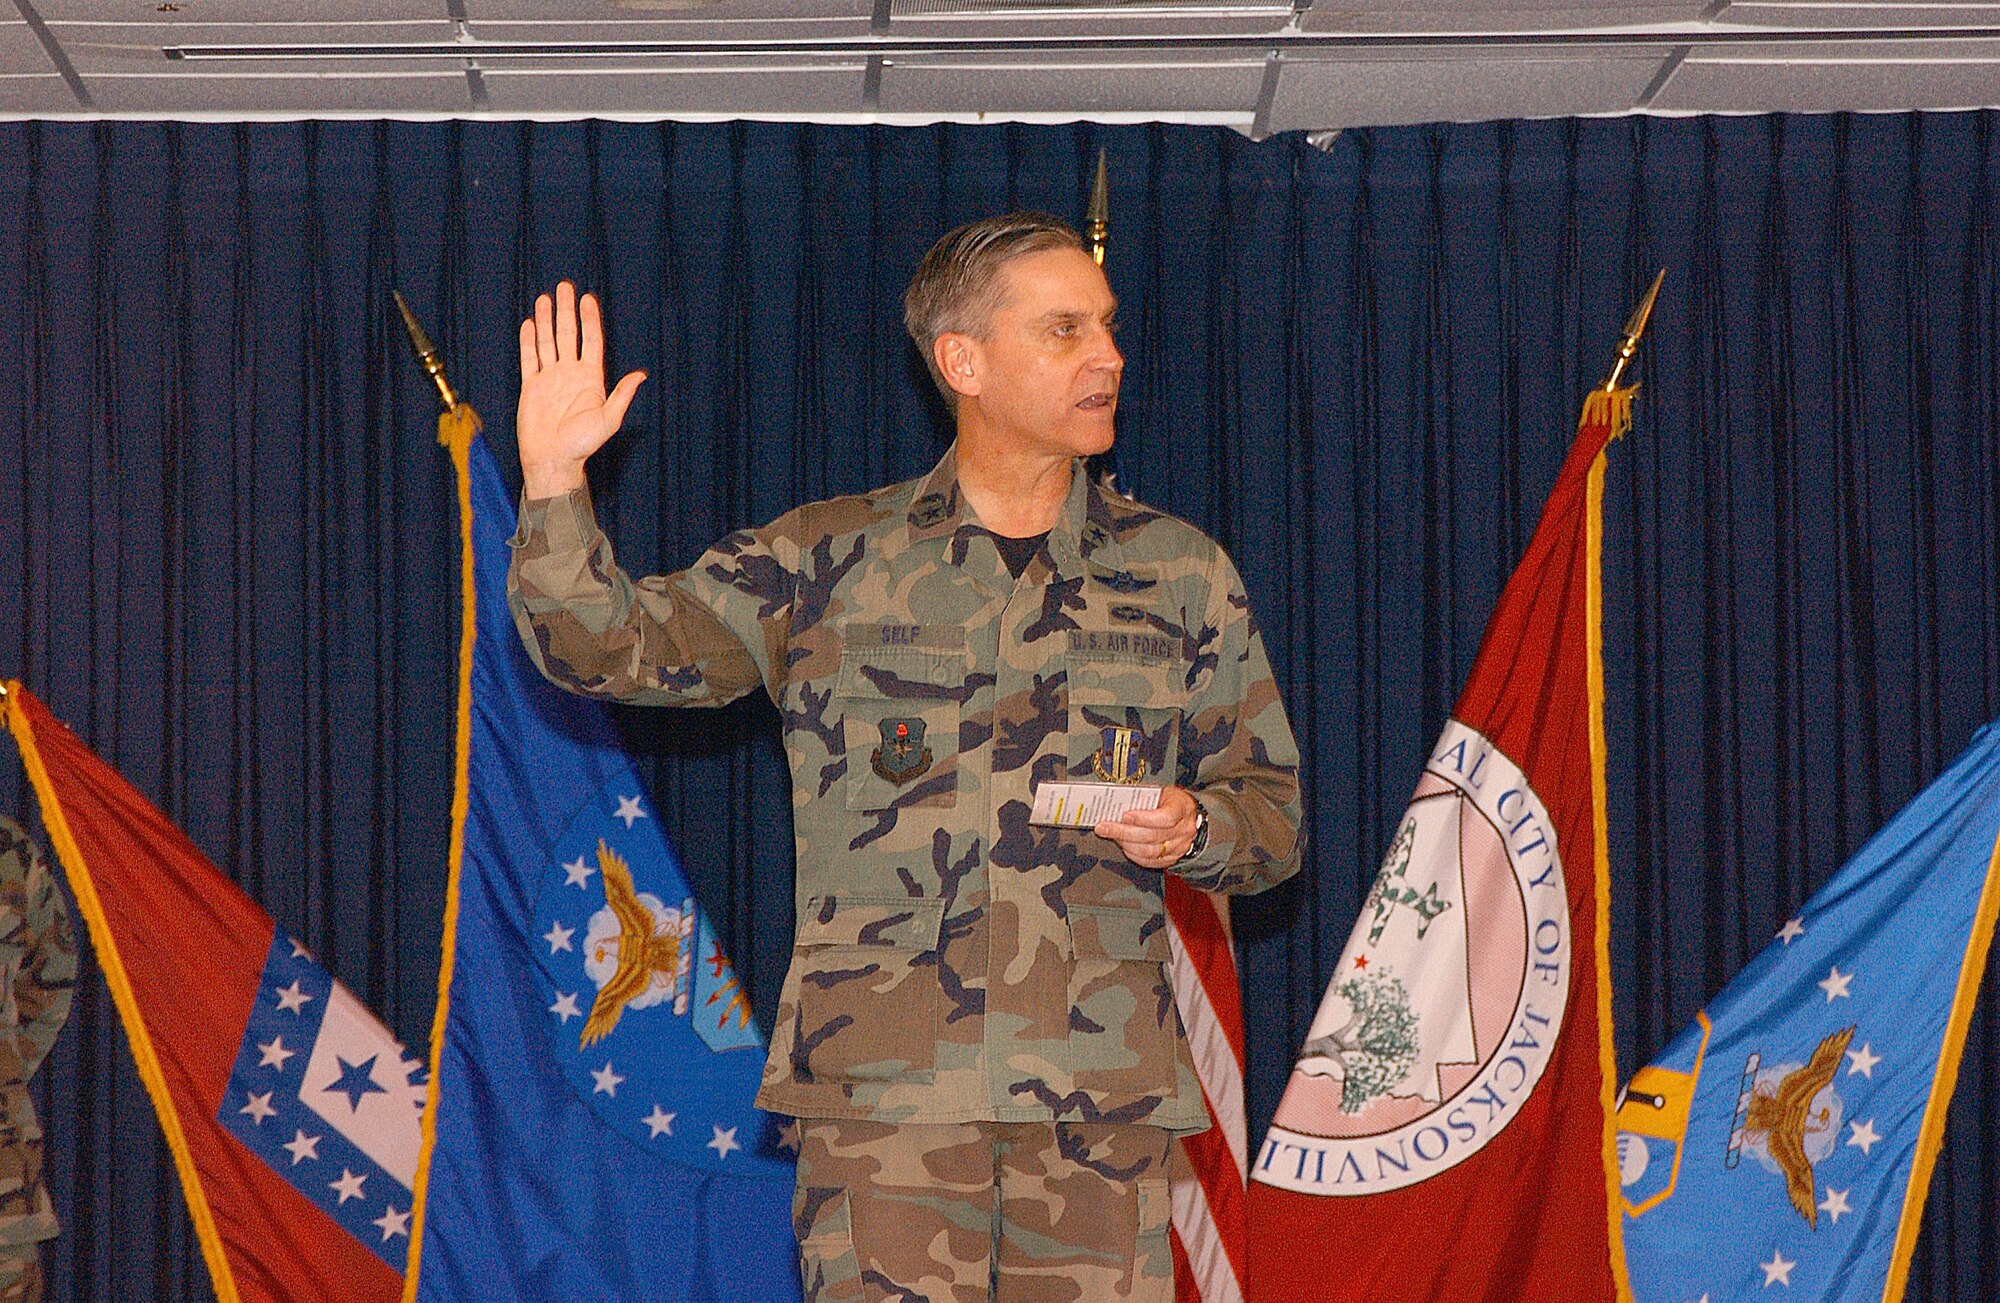 Brig. Gen. Kip Self, 314th Airlift Wing commander, administers the oath of enlistment to a group of honorary commanders at Little Rock Air Force Base. 